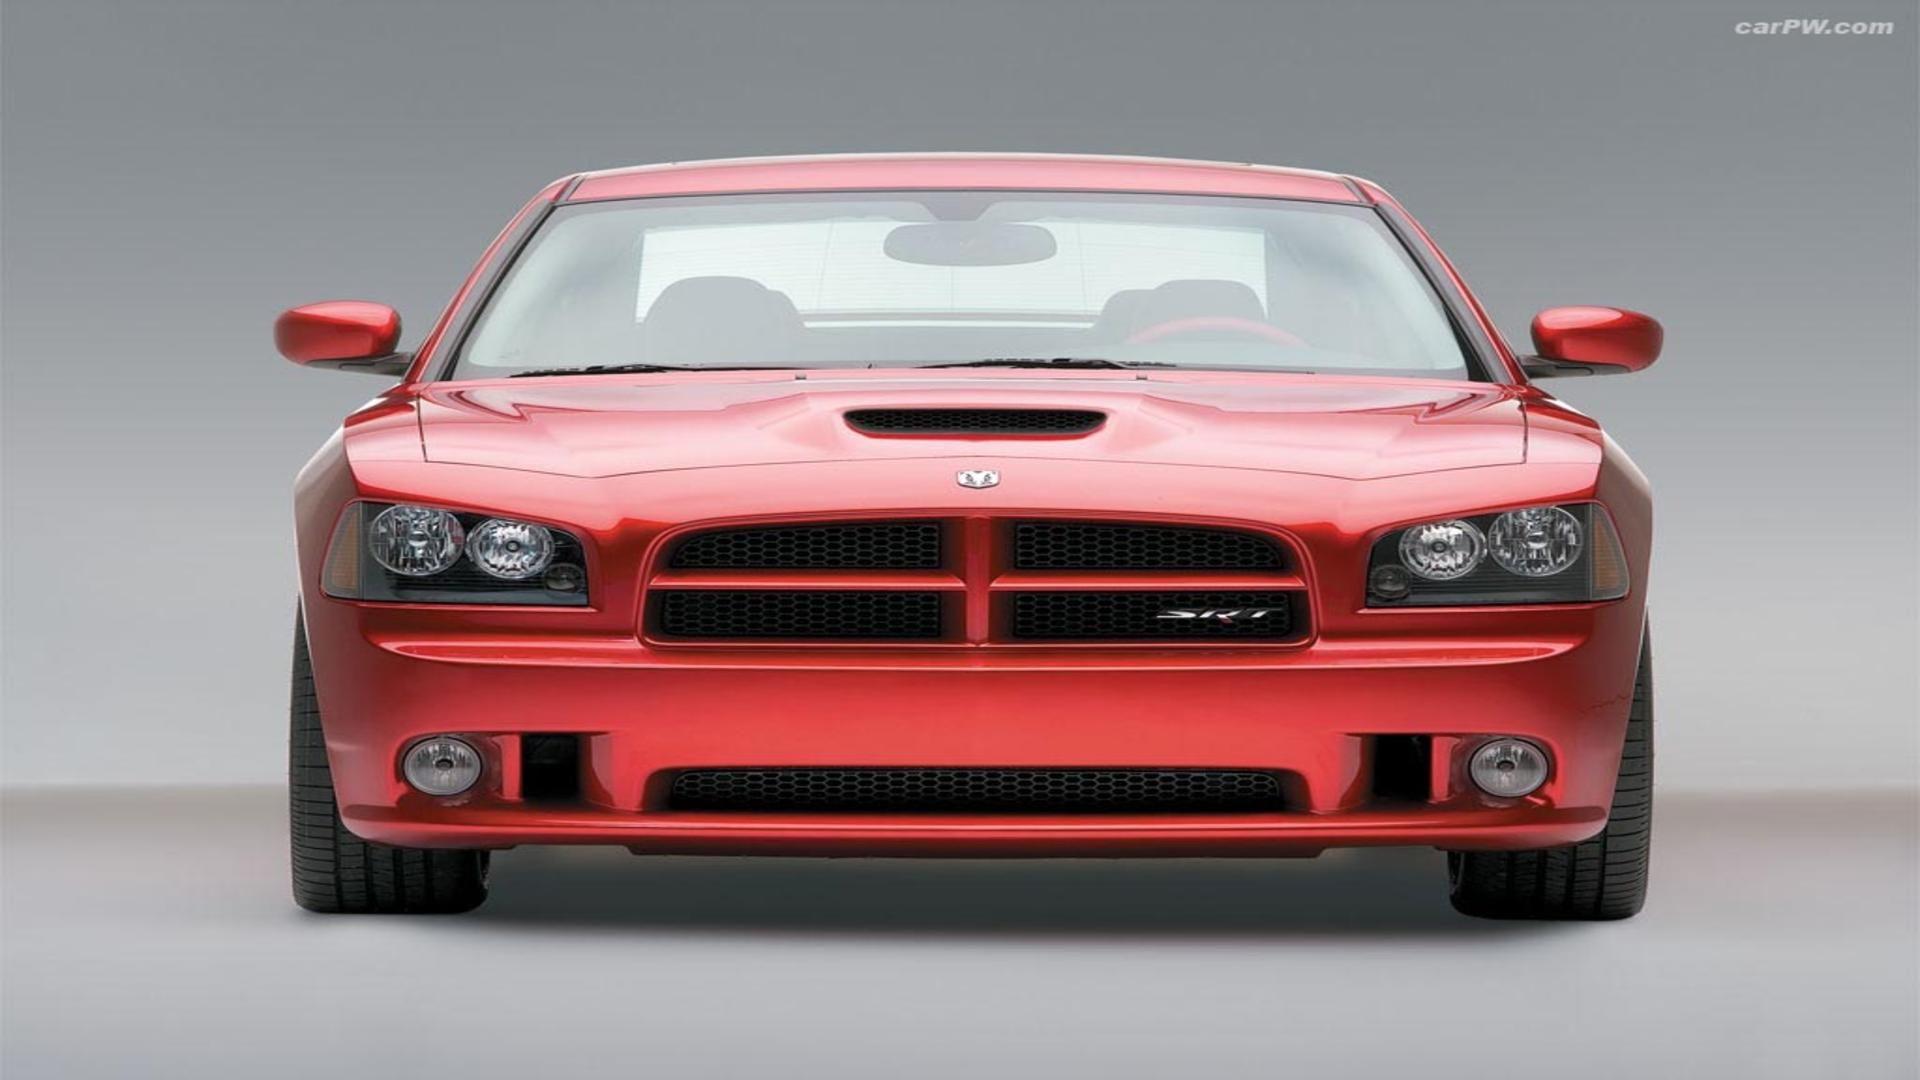 Dodge Charger Srt8 Wallpaper HD In Cars Imageci